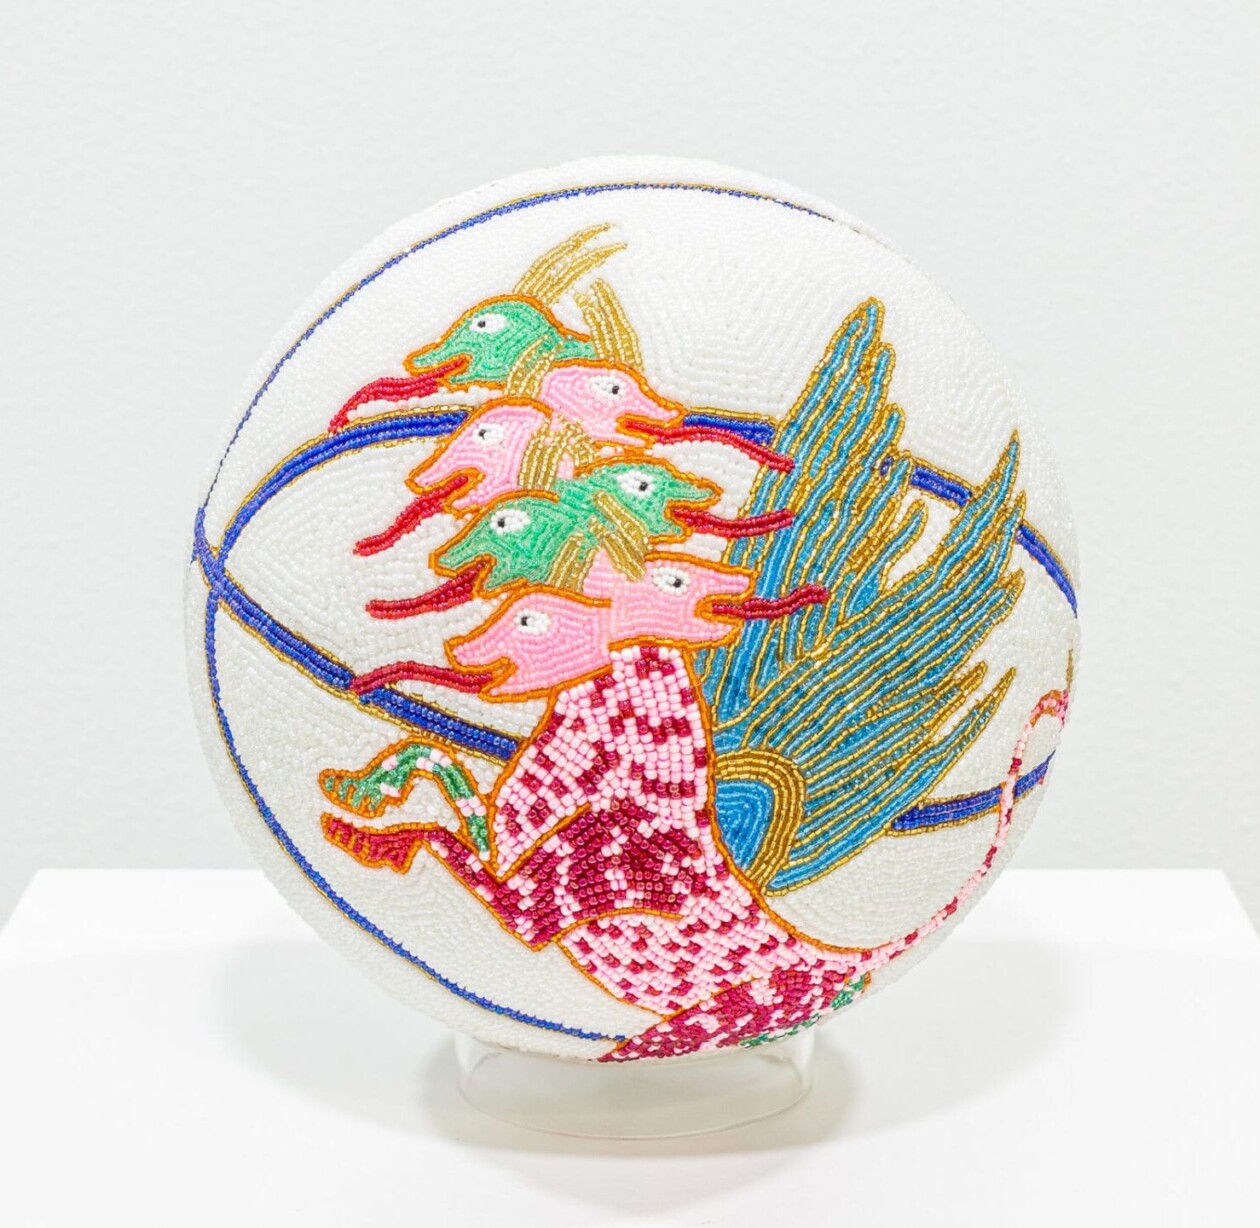 From Playground To Prophecy, Jorge Mañes Rubio's Beaded Basketball Sculptures (9)